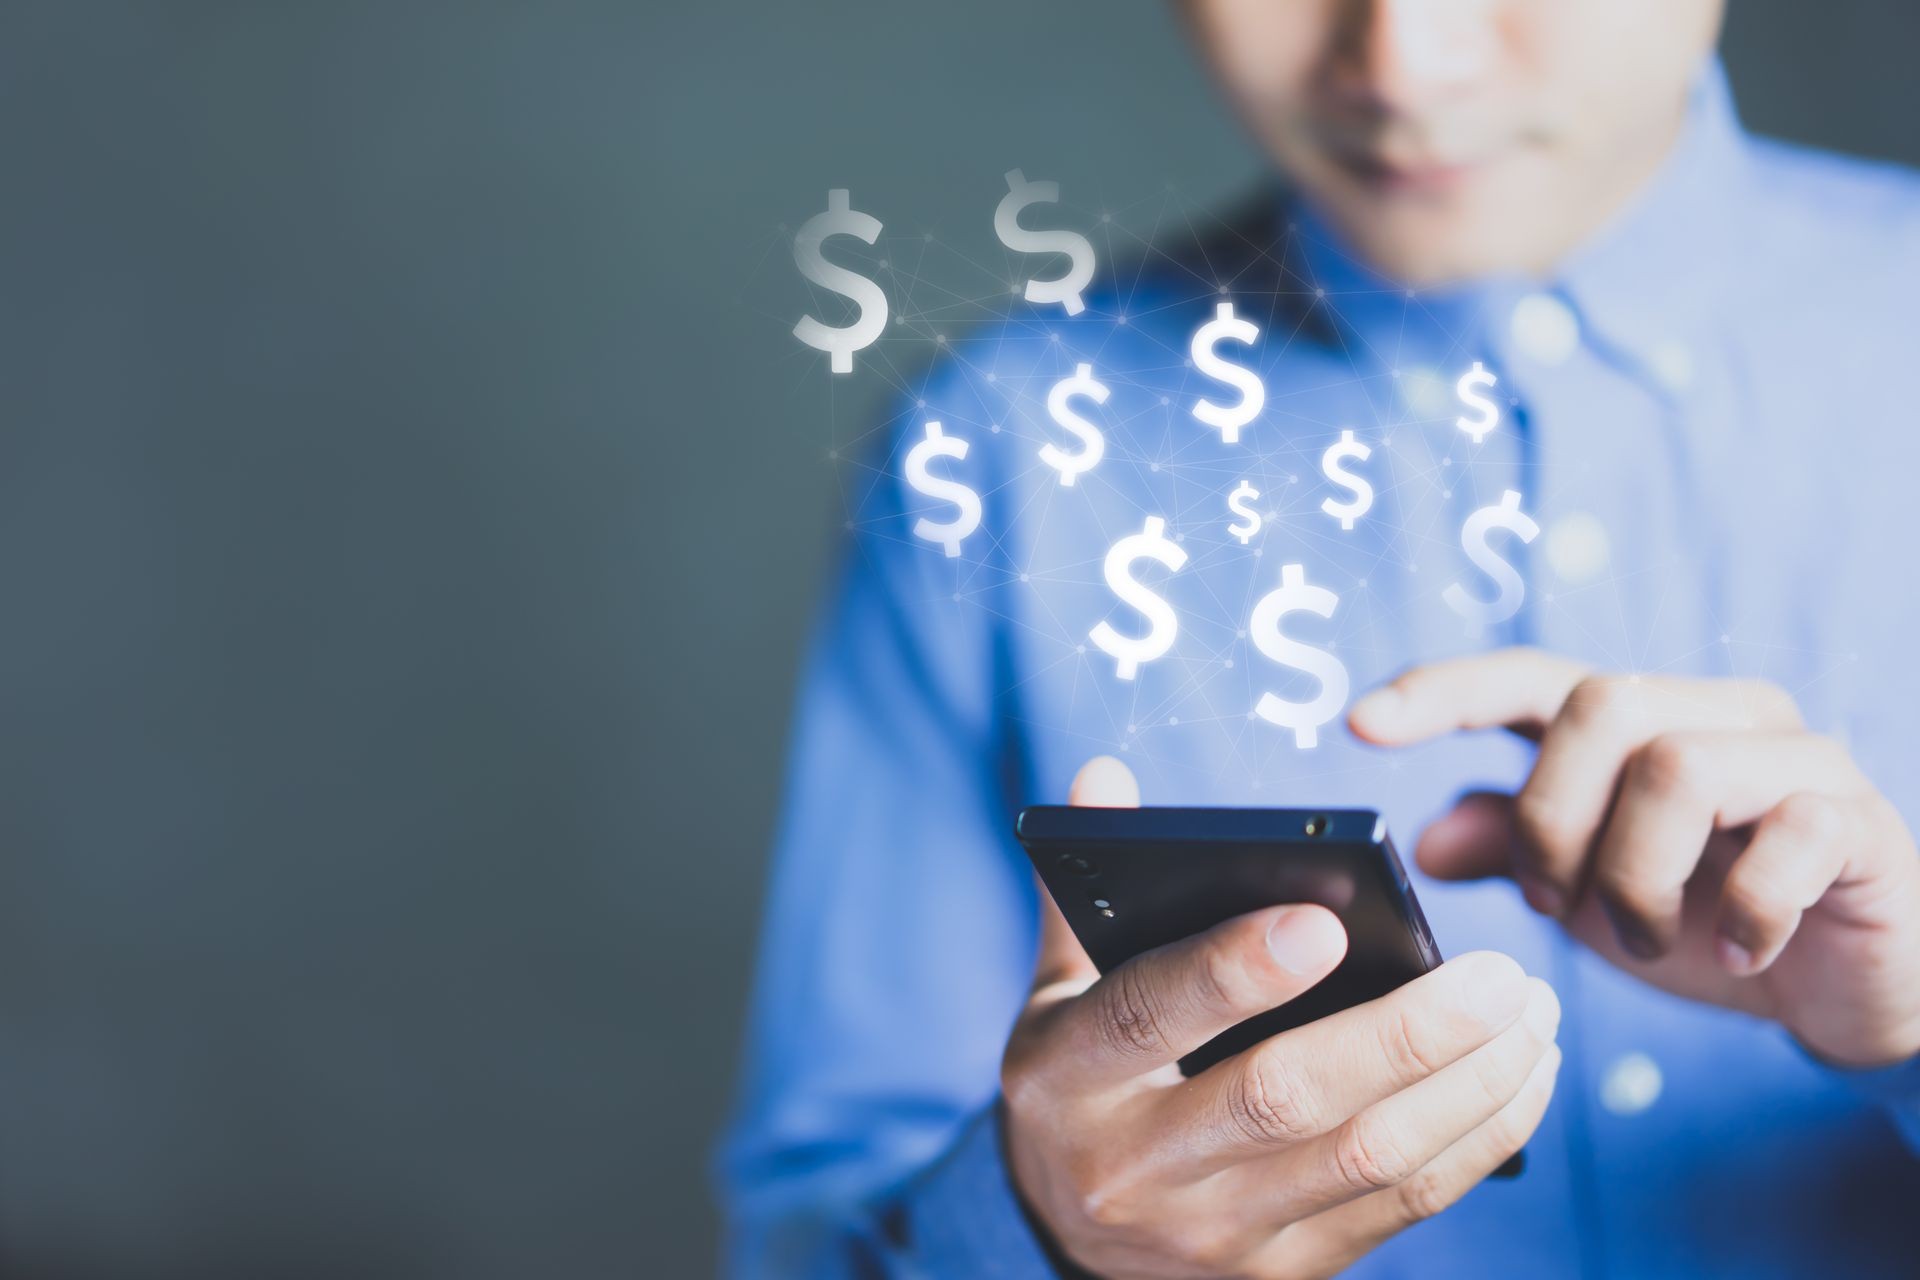 Man using mobile phone with online transaction application, Concept financial technology (FinTech)